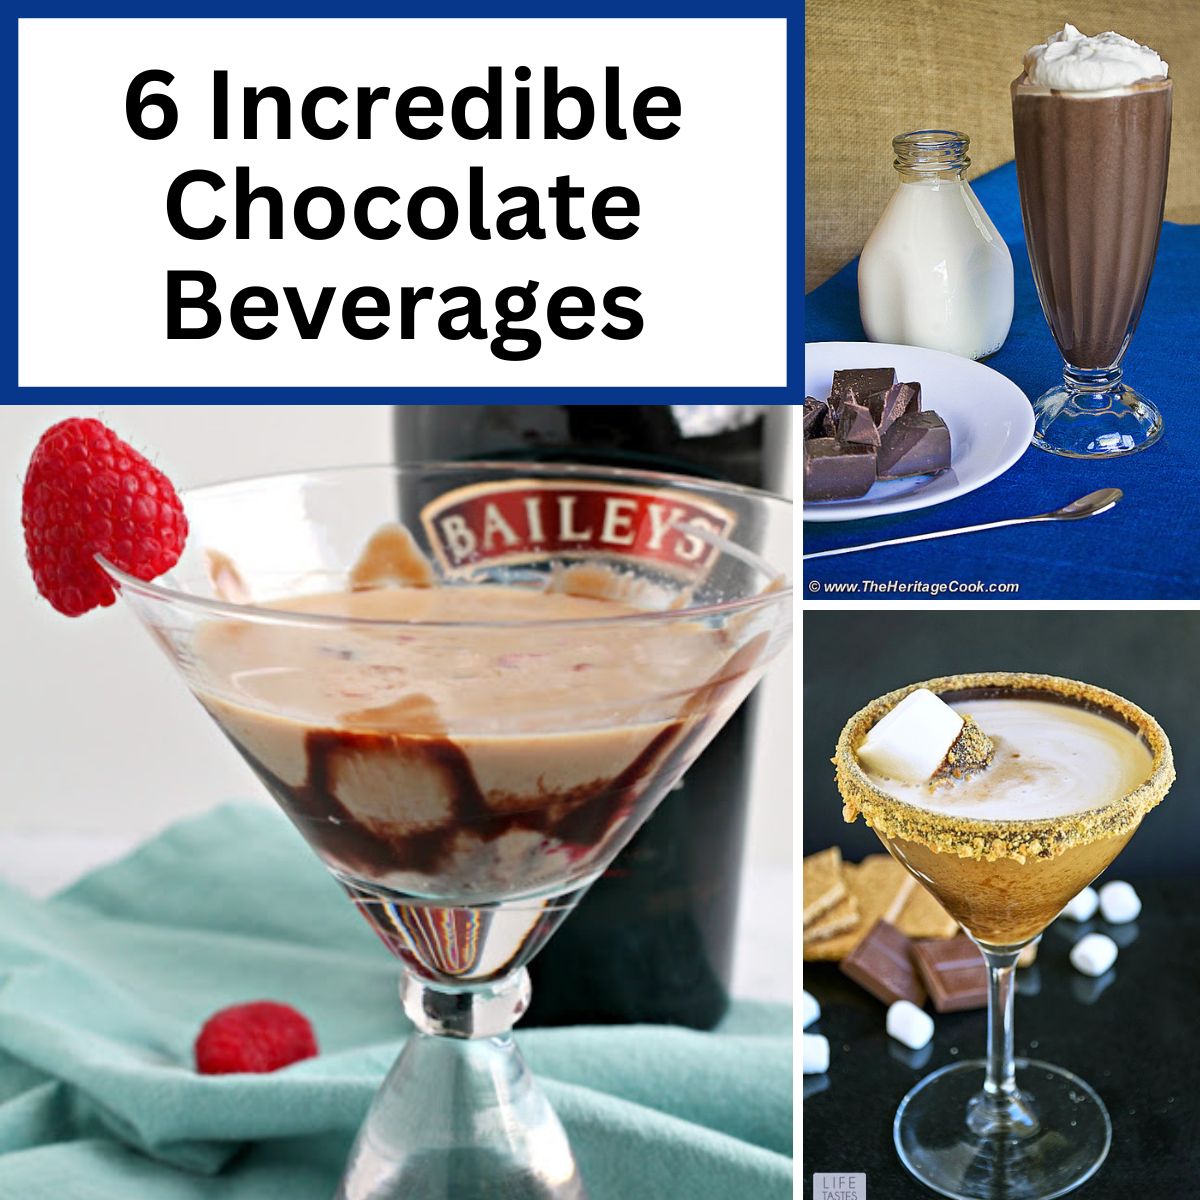 Collection of 6 Incredible Chocolate Beverages from around the Internet, compiled by Jane Bonacci, The Heritage Cook.